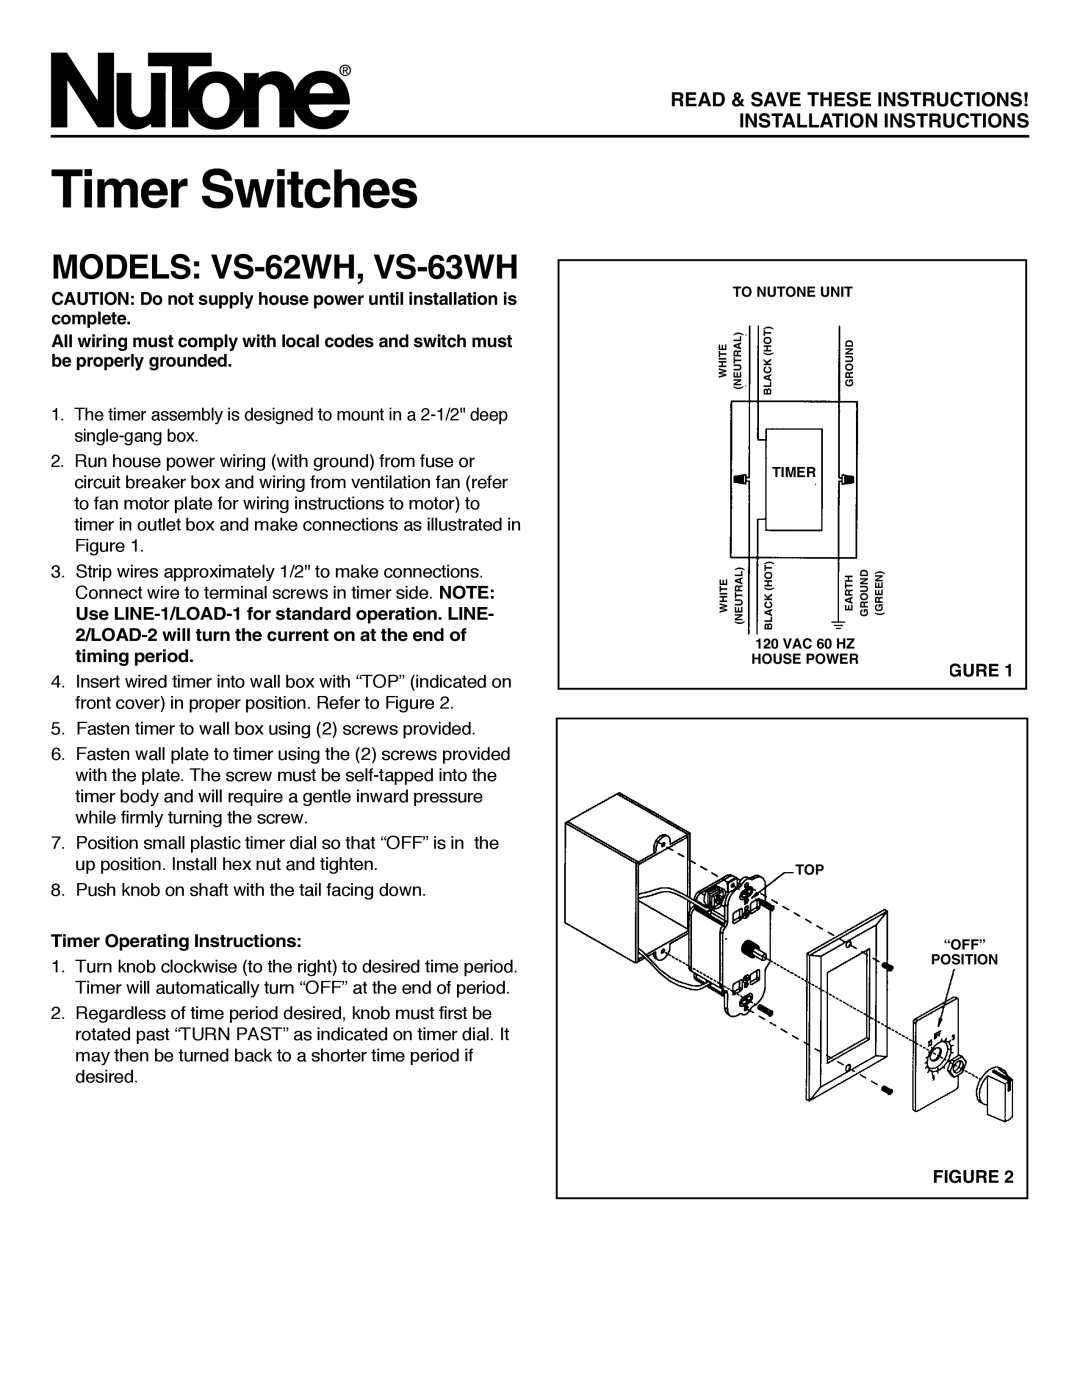 NuTone installation instructions Timer Switches, MODELS VS-62WH, VS-63WH, timing period, Timer Operating Instructions 